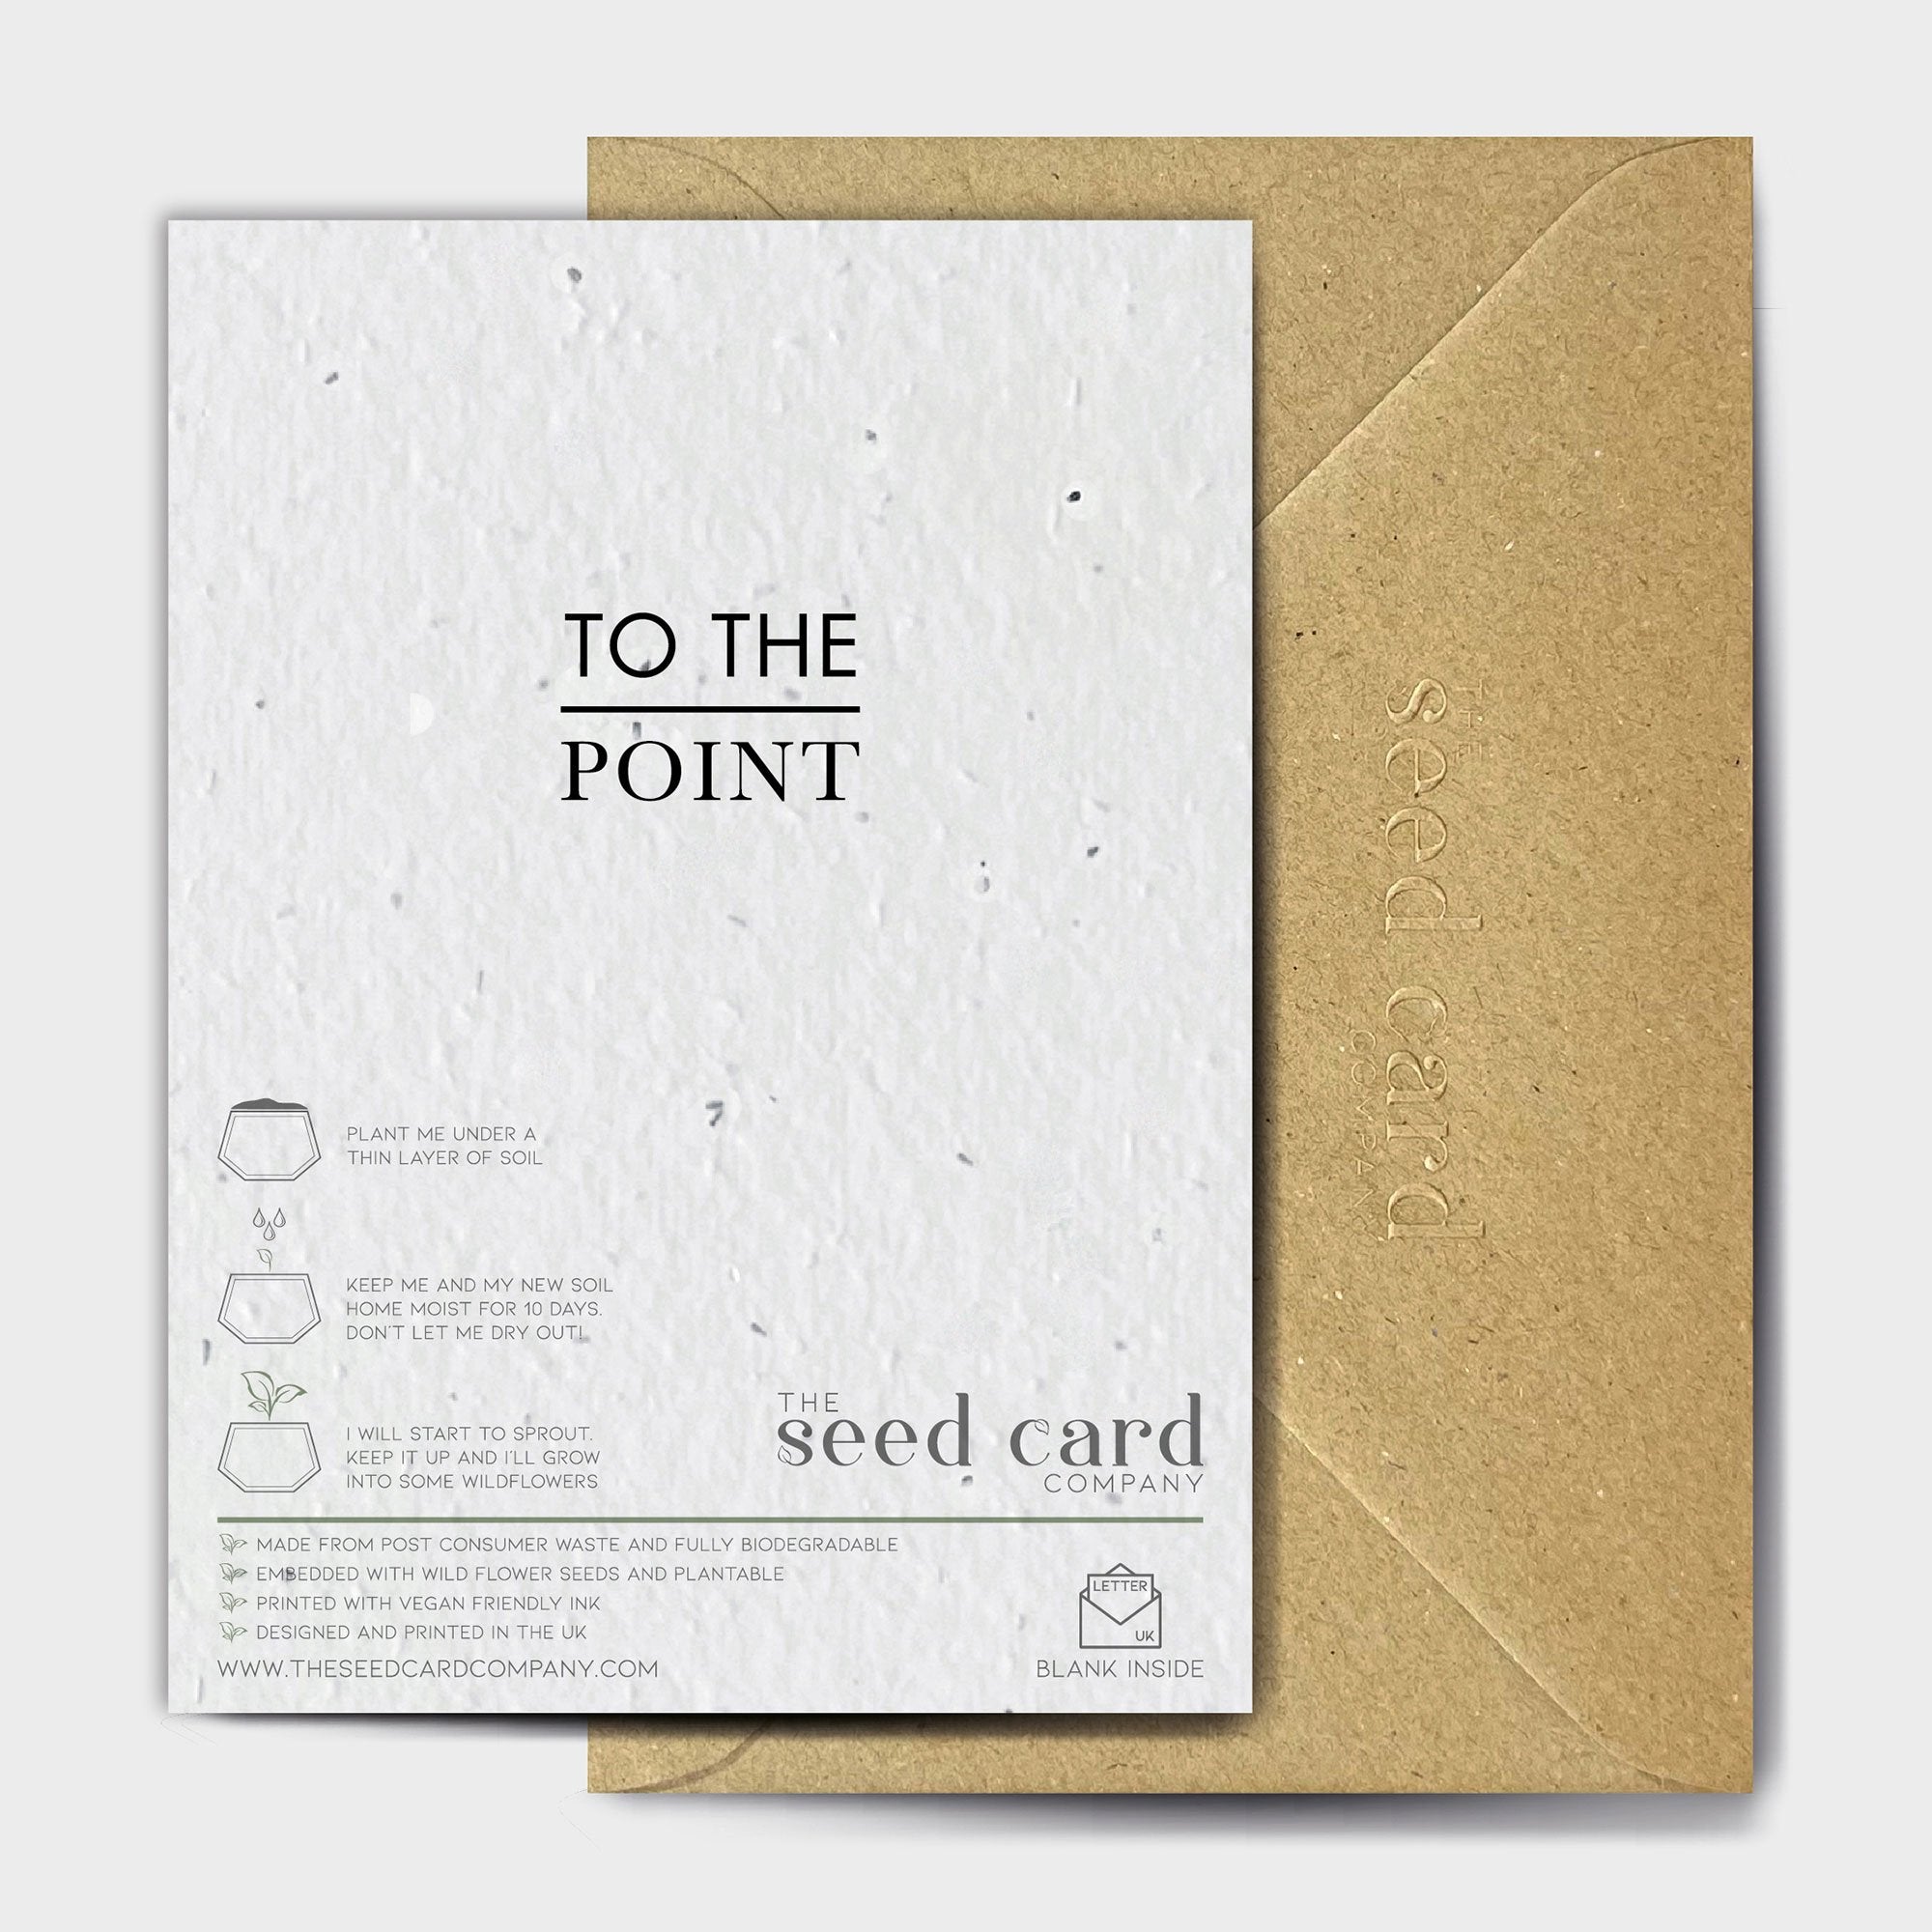 Shop online Got Everything Covered - 100% biodegradable seed-embedded cards Shop -The Seed Card Company